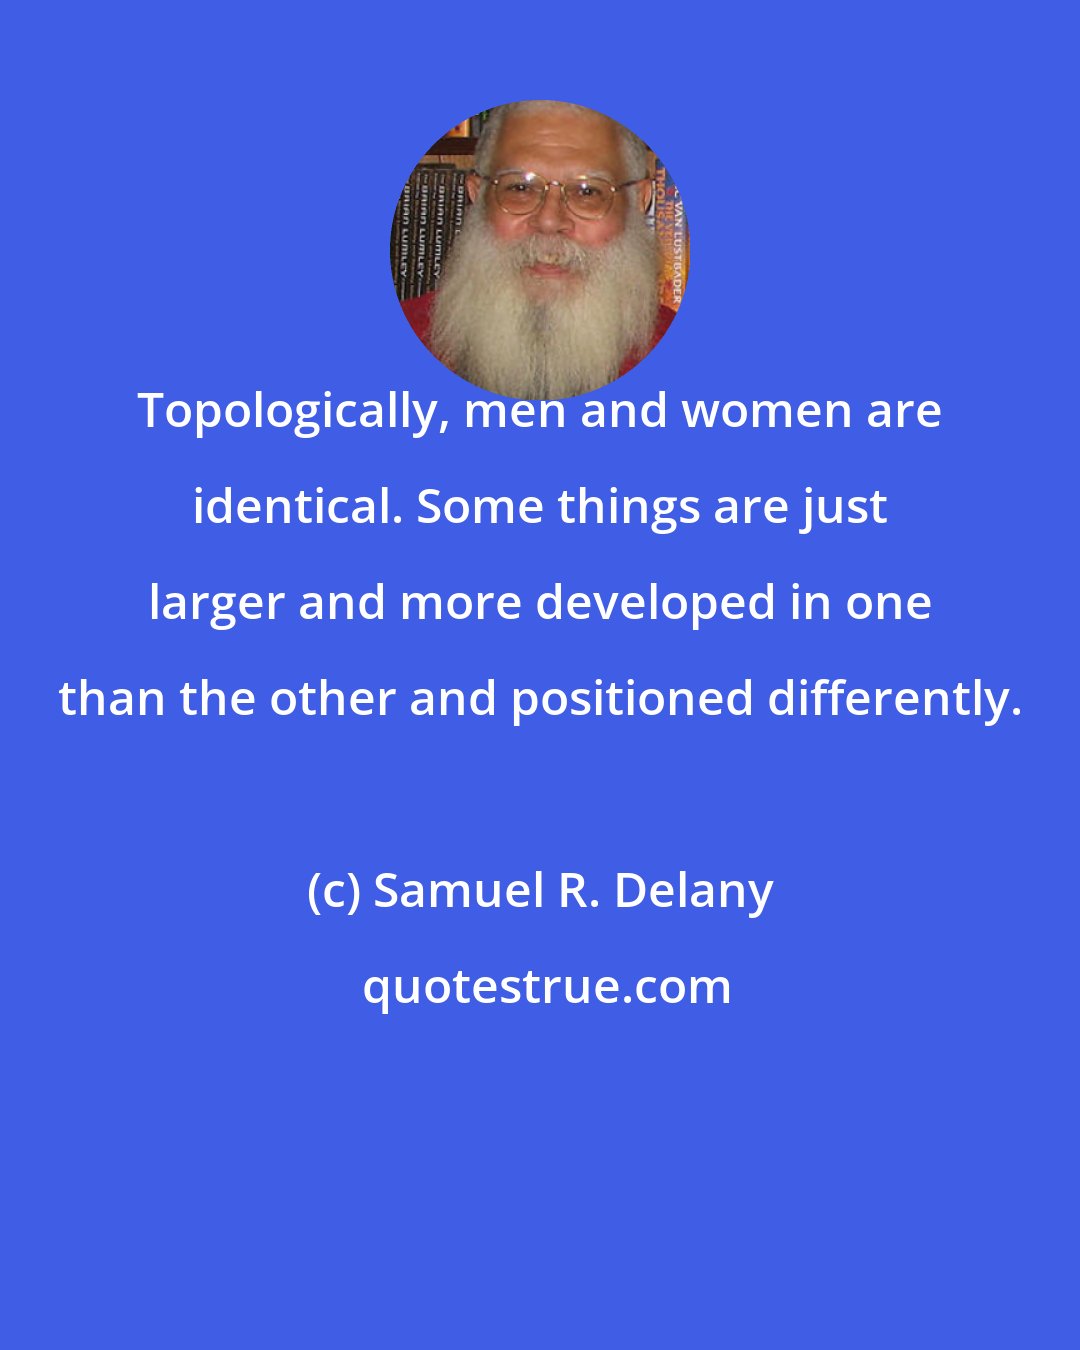 Samuel R. Delany: Topologically, men and women are identical. Some things are just larger and more developed in one than the other and positioned differently.